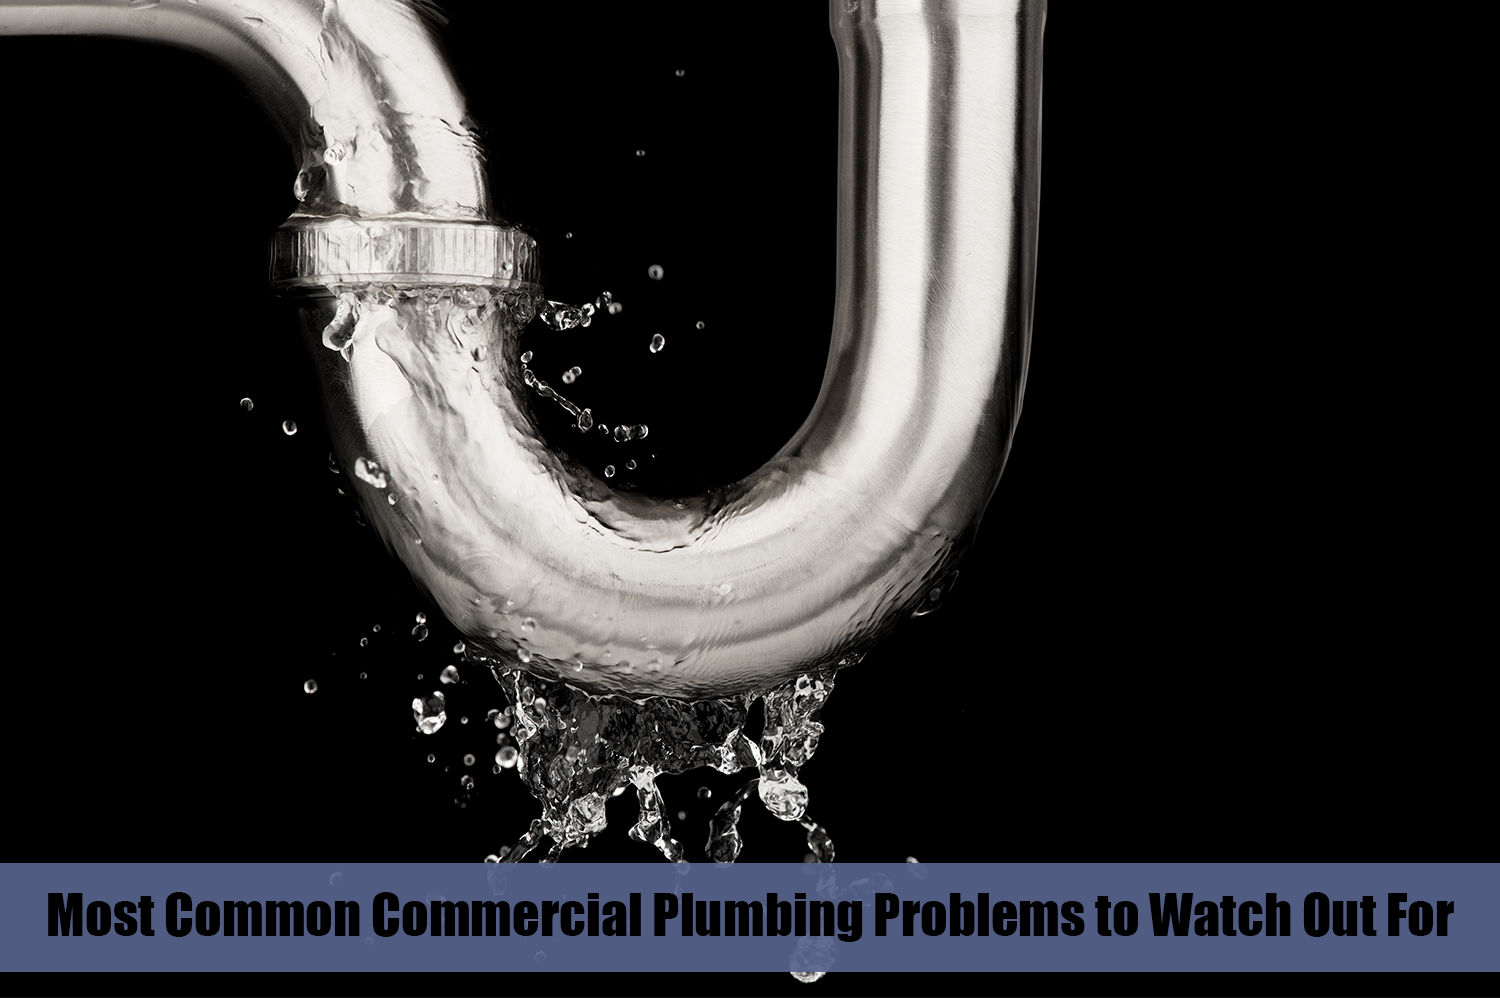 A leaking pipe with a black background; one of the most common commercial plumbing problems.